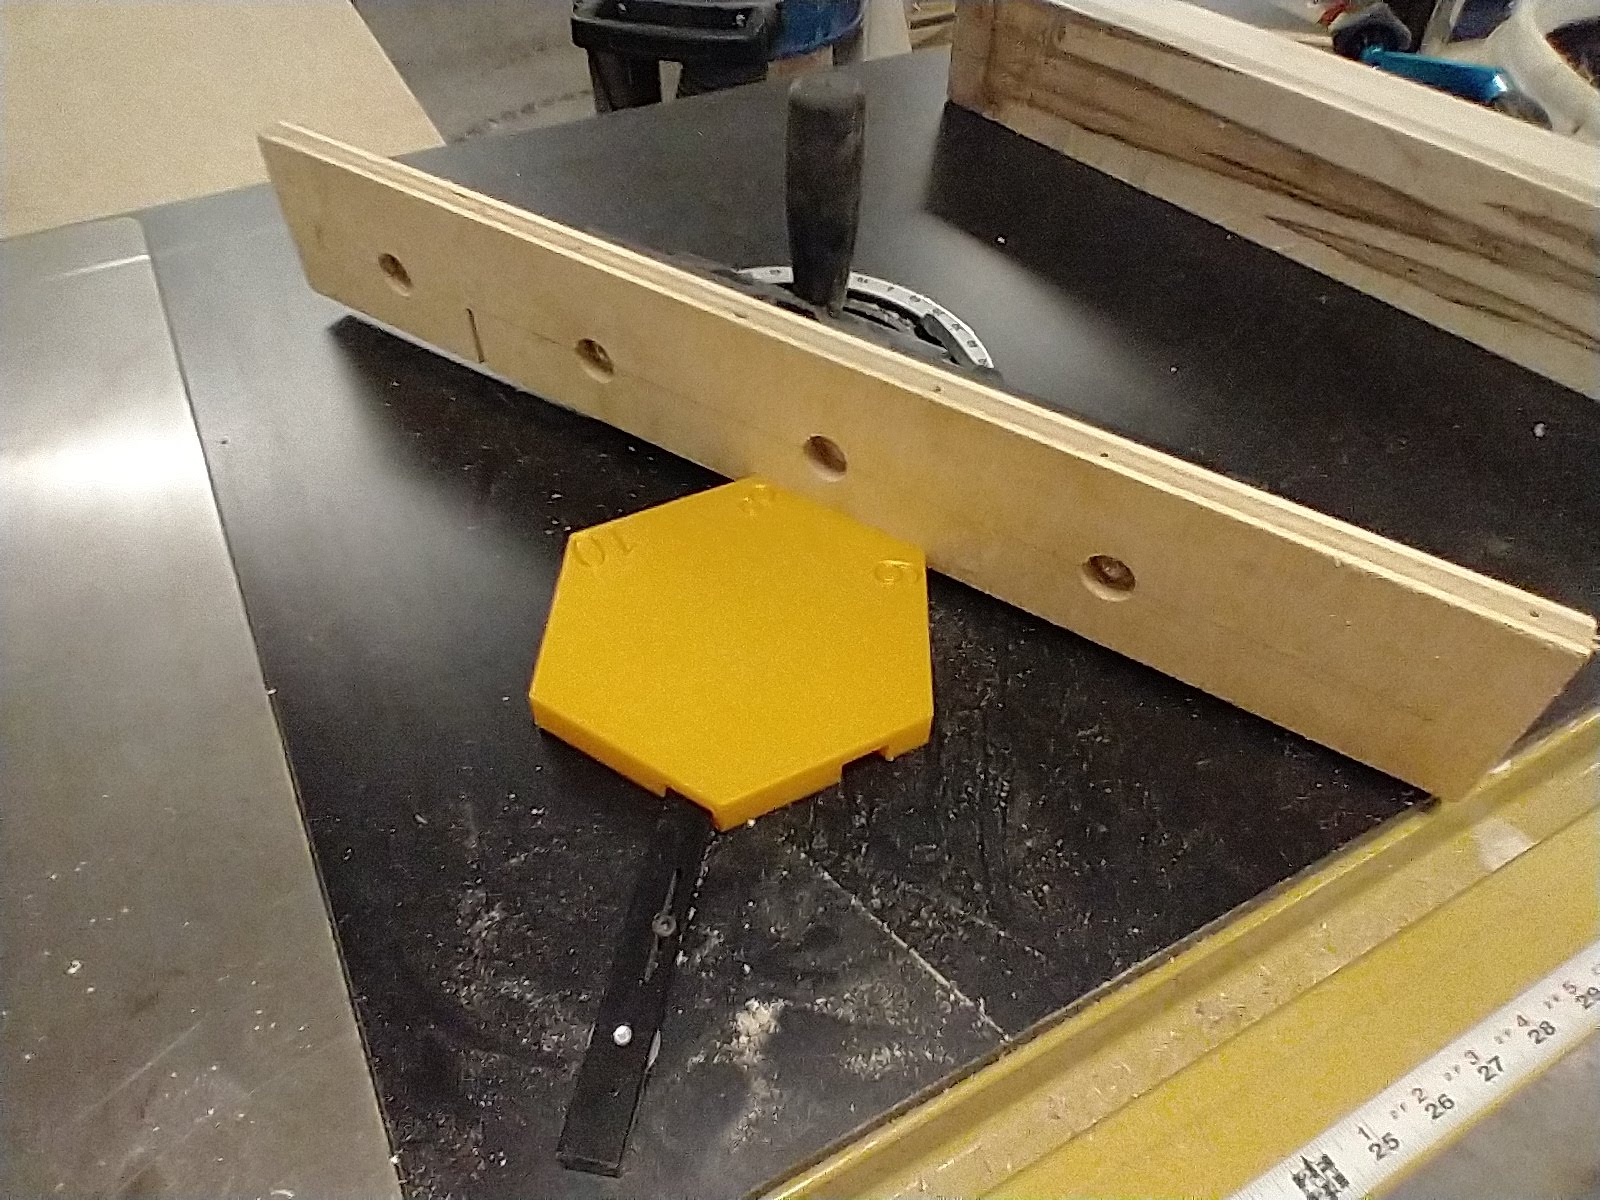 Table saw miter guide for angled cuts